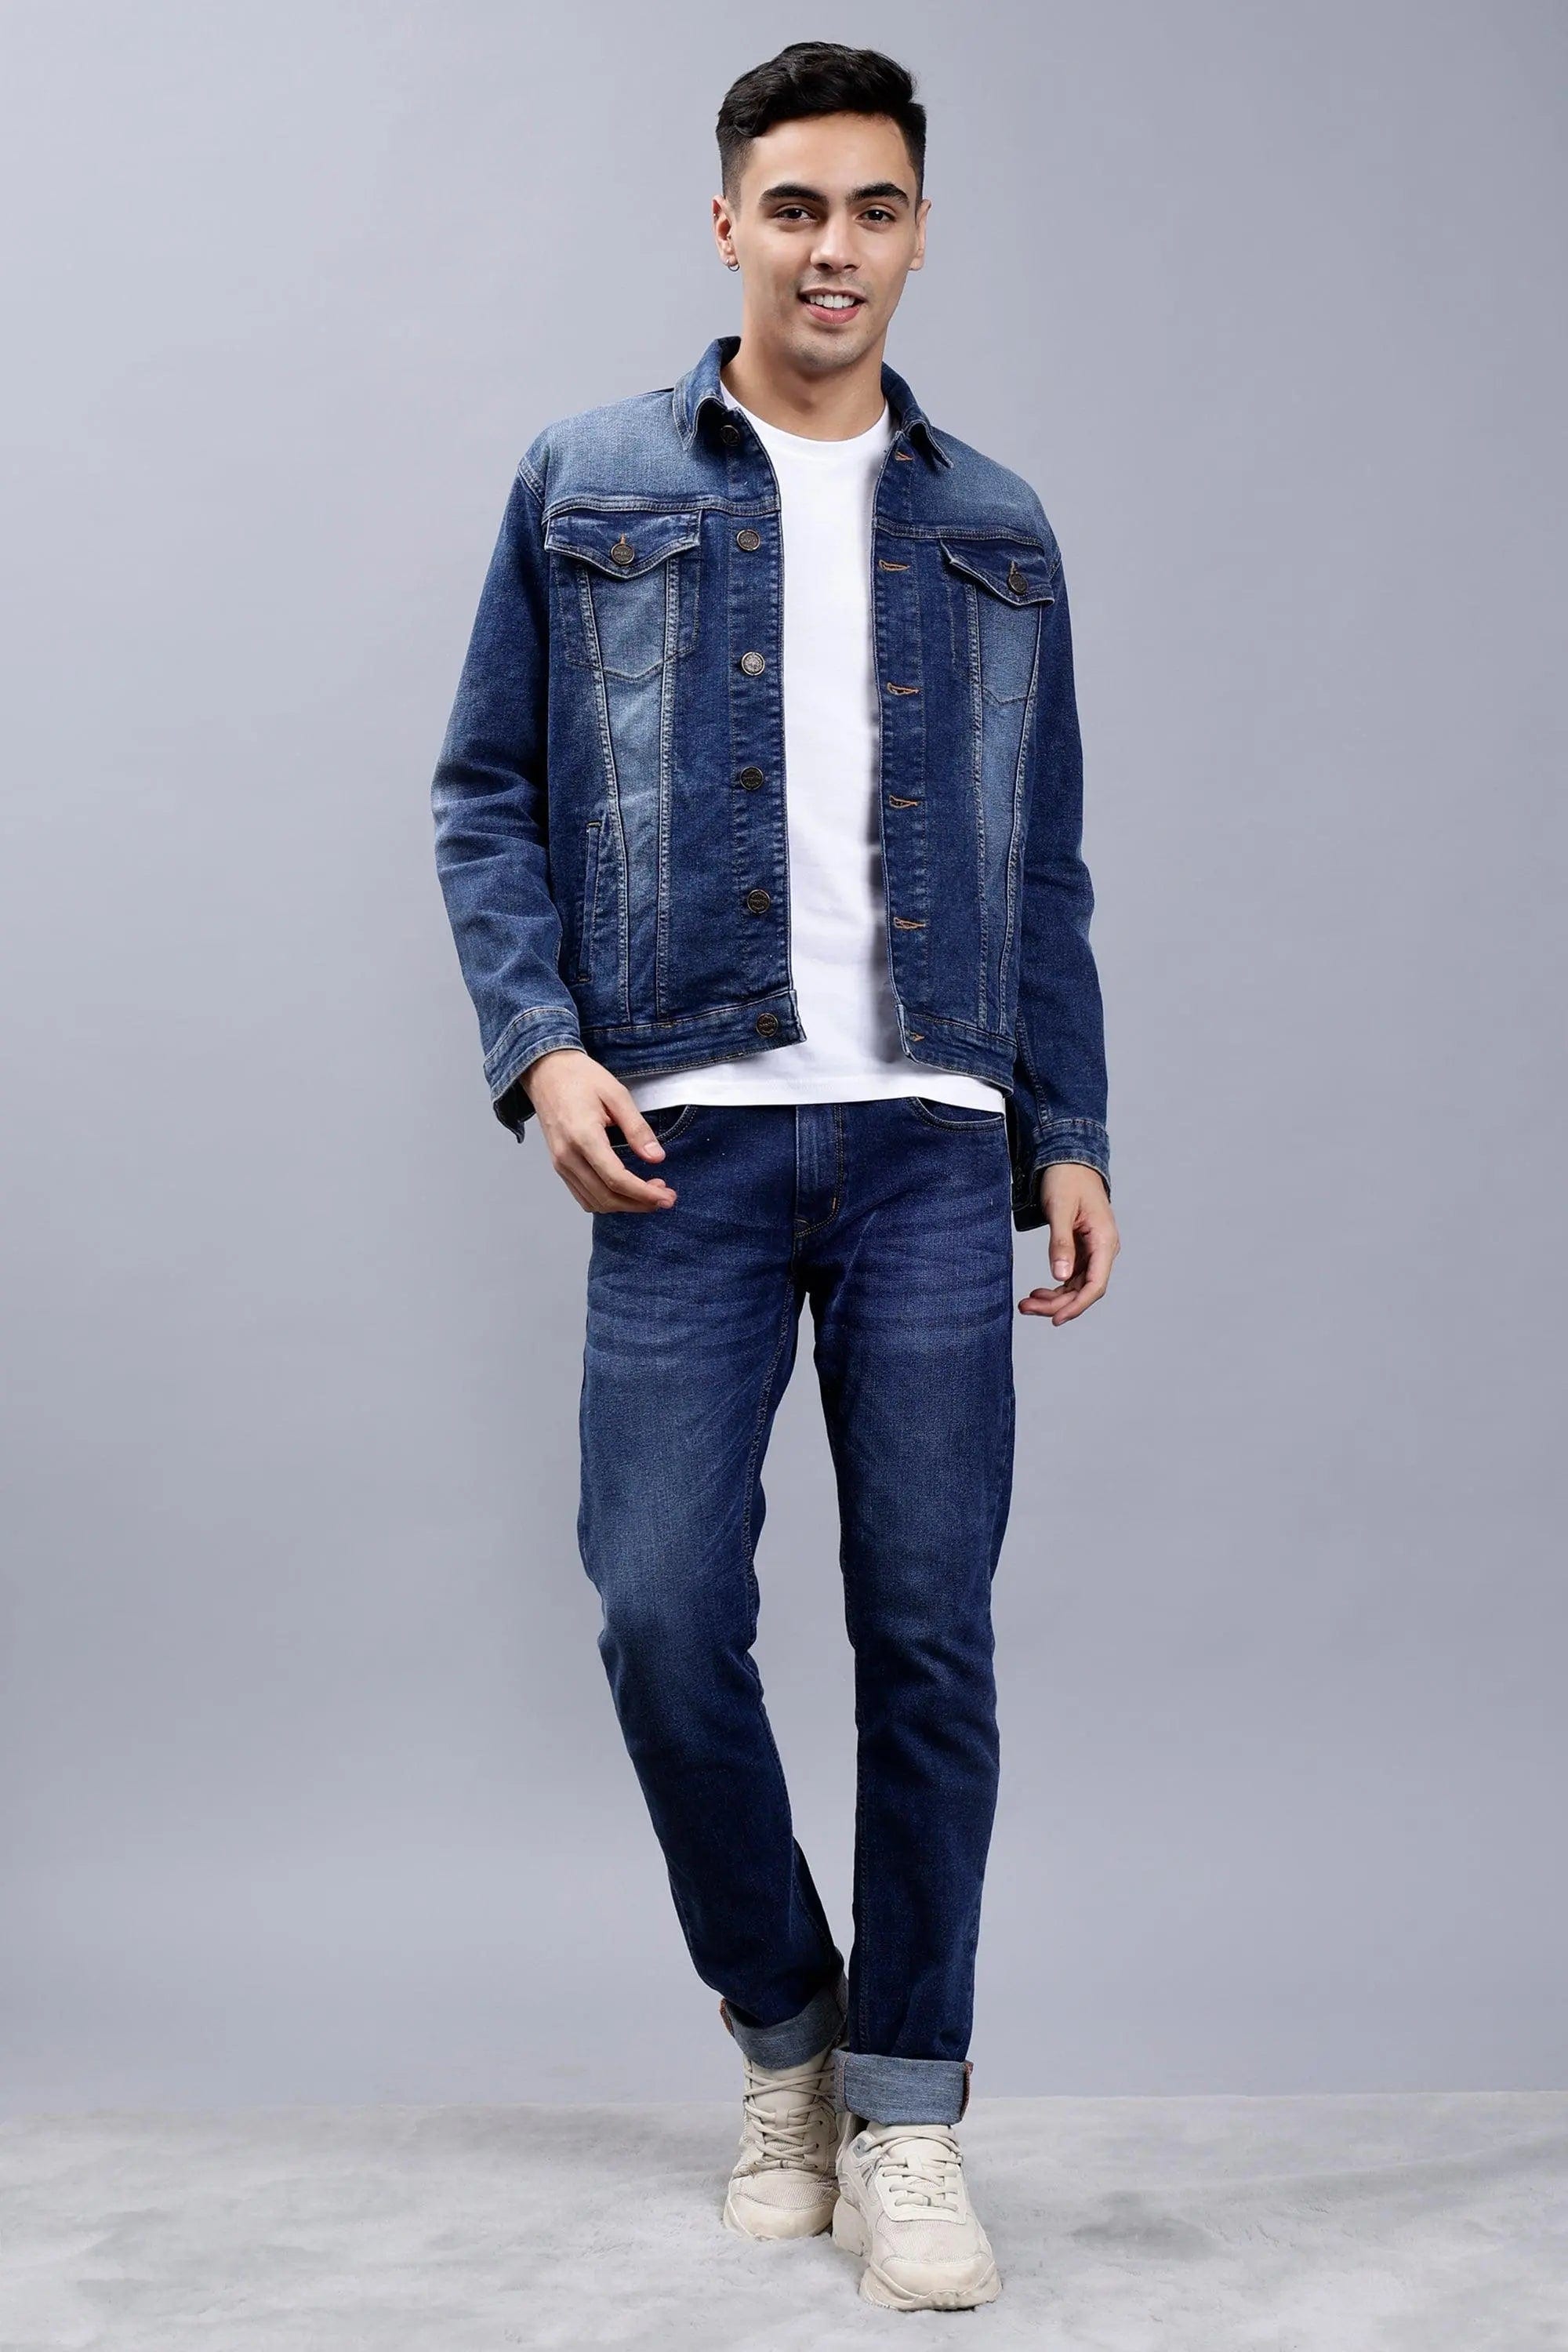 Peplos Jeans | One Stop For Men’s Fashion